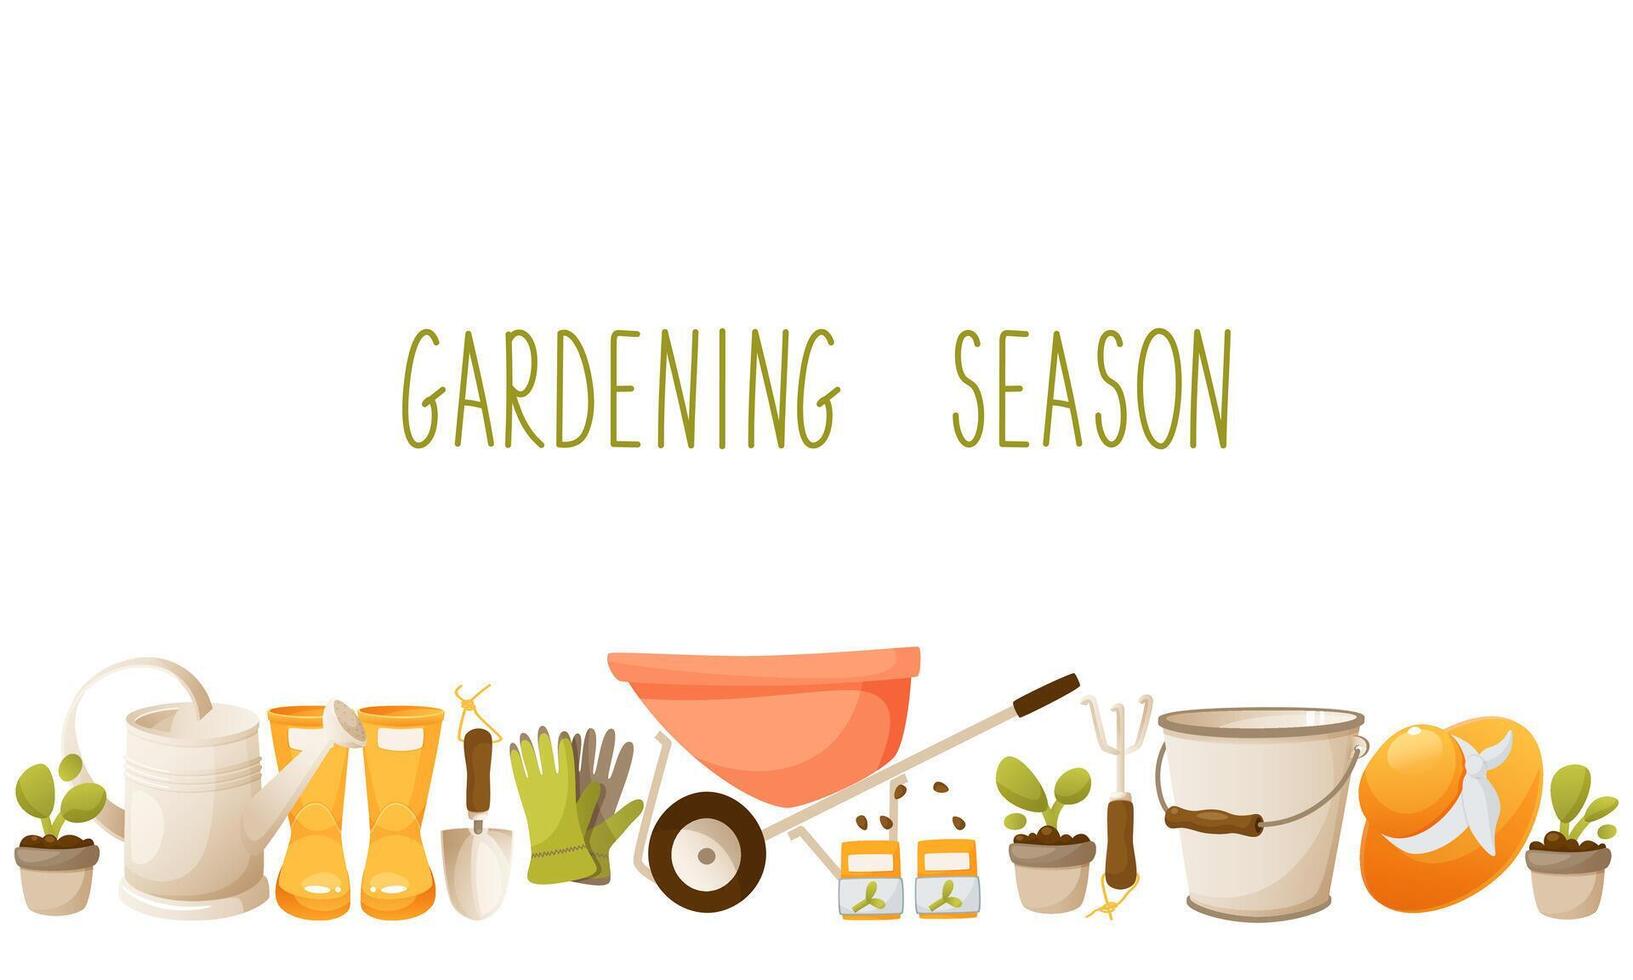 Vector design template on a garden theme, with gardening tools. With space for text. Gardening season, agricultural season. Horizontal bottom border. Template for invitations, posters, cards